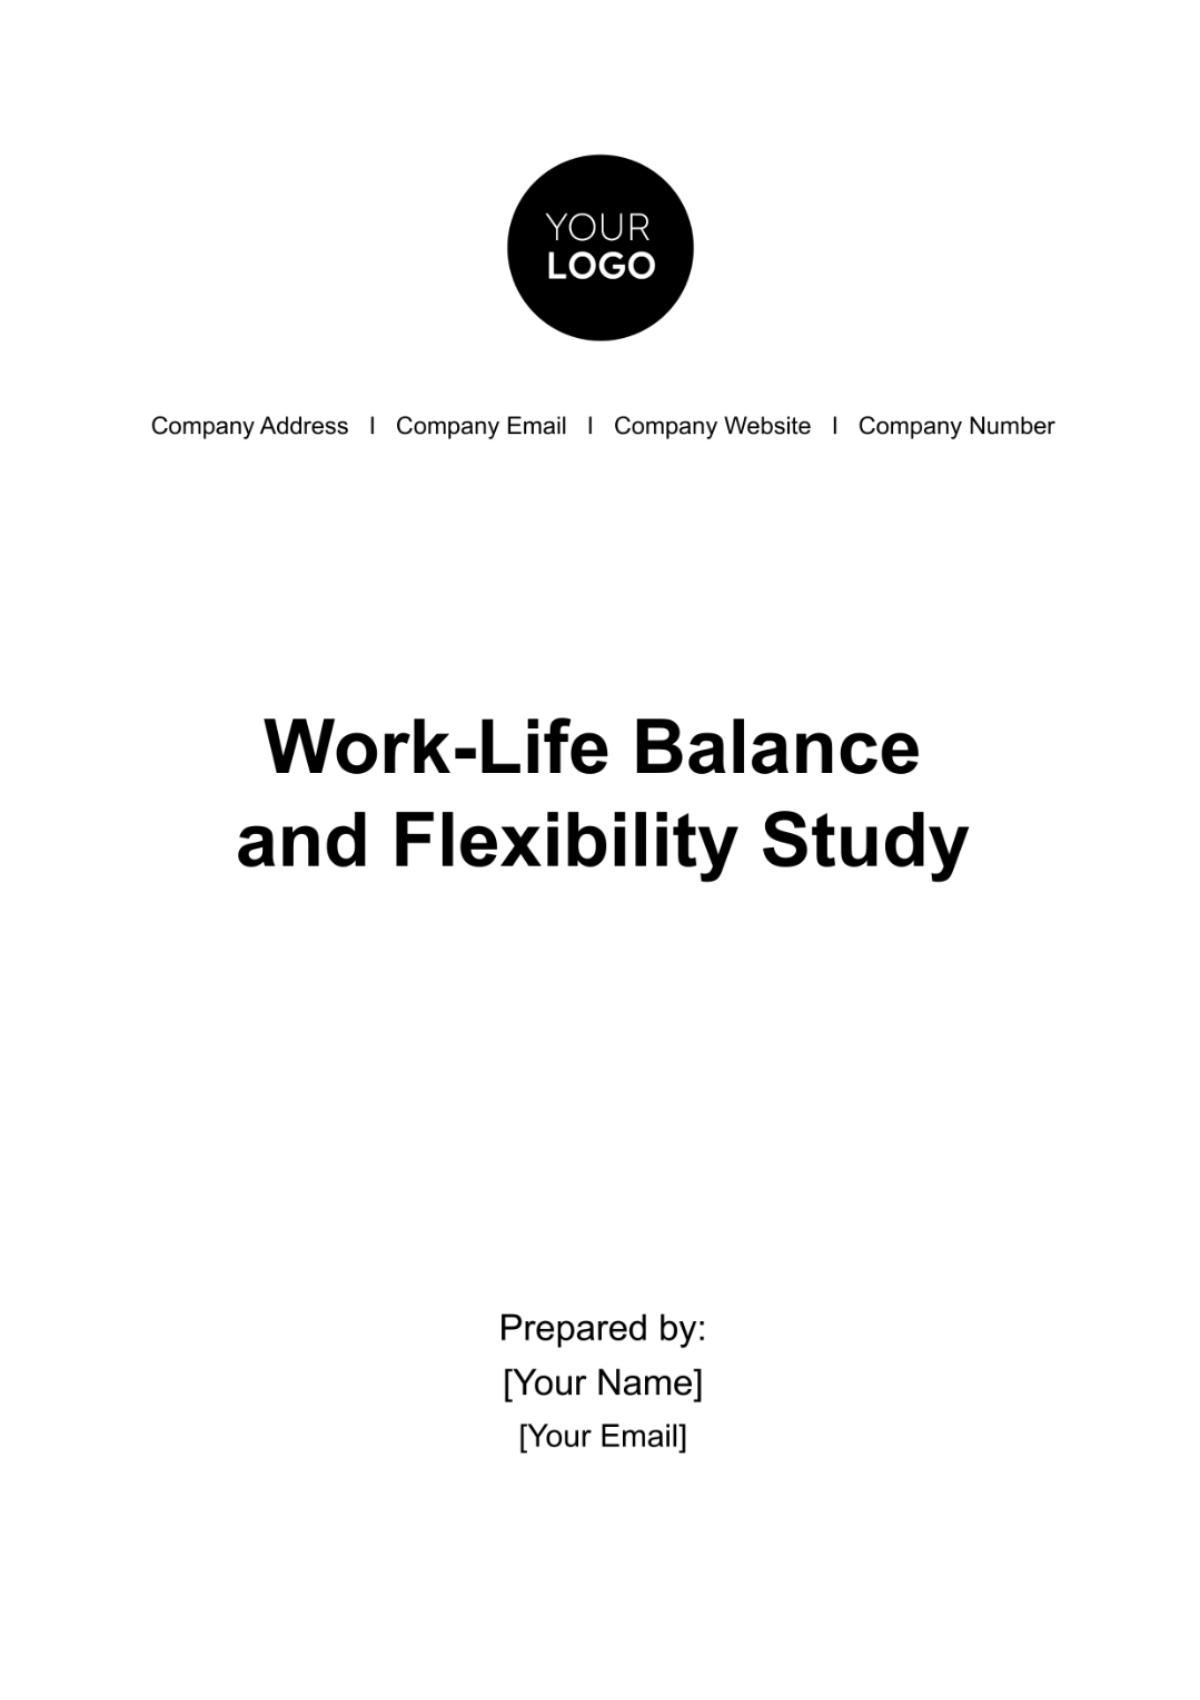 Free Work-life Balance and Flexibility Study HR Template